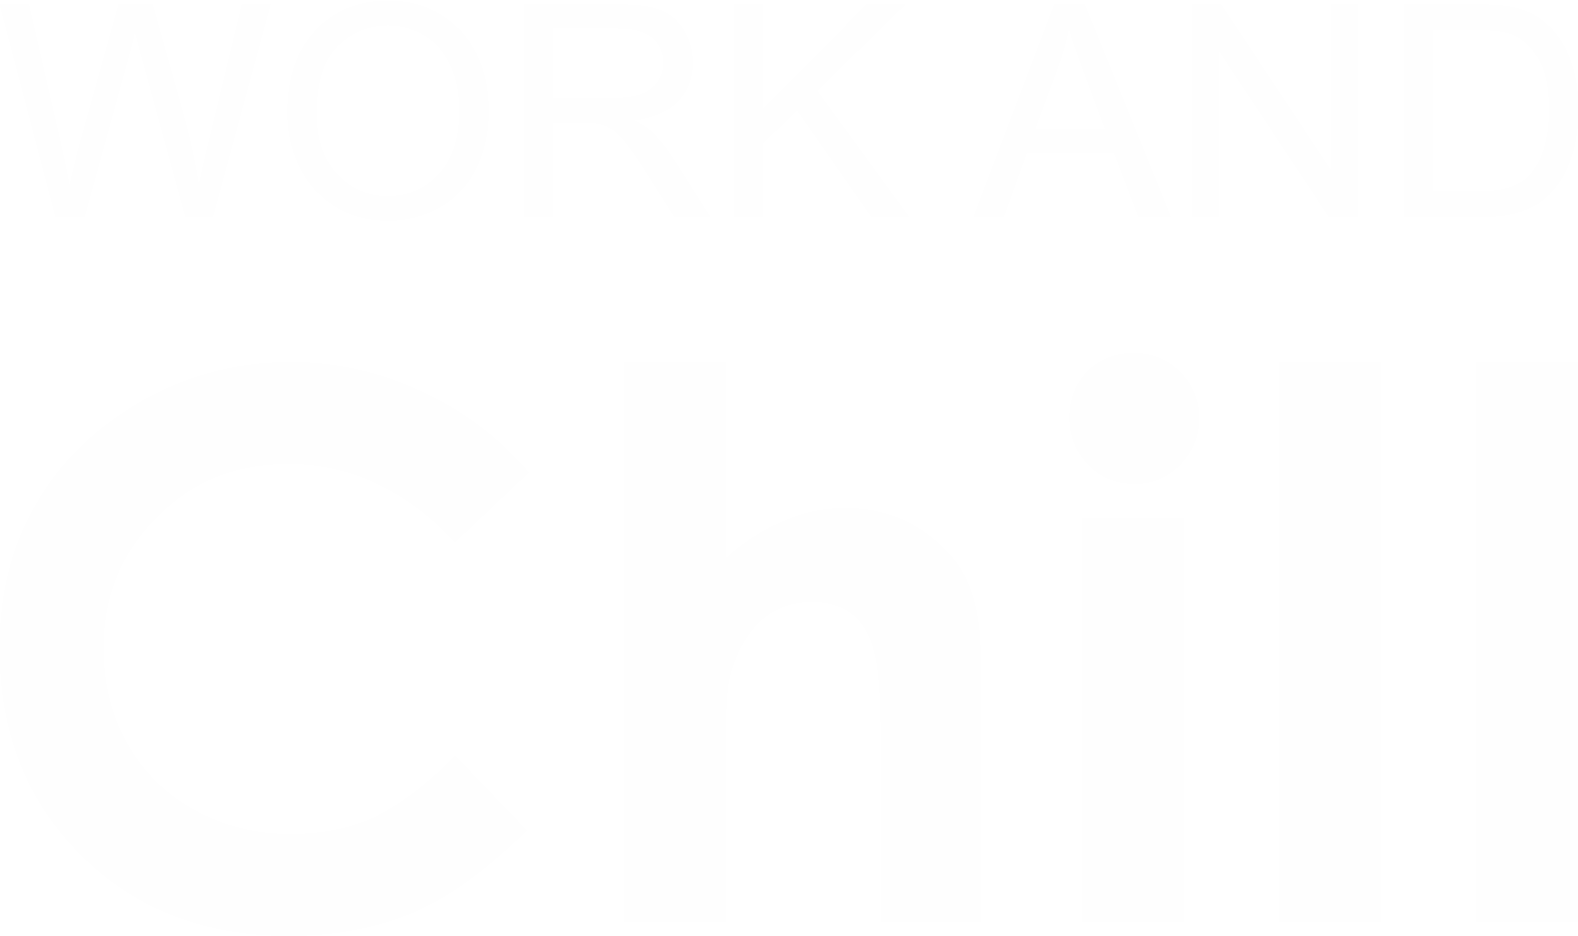 Work And Chill - Employee Resource Group Bonding & Virtual Events